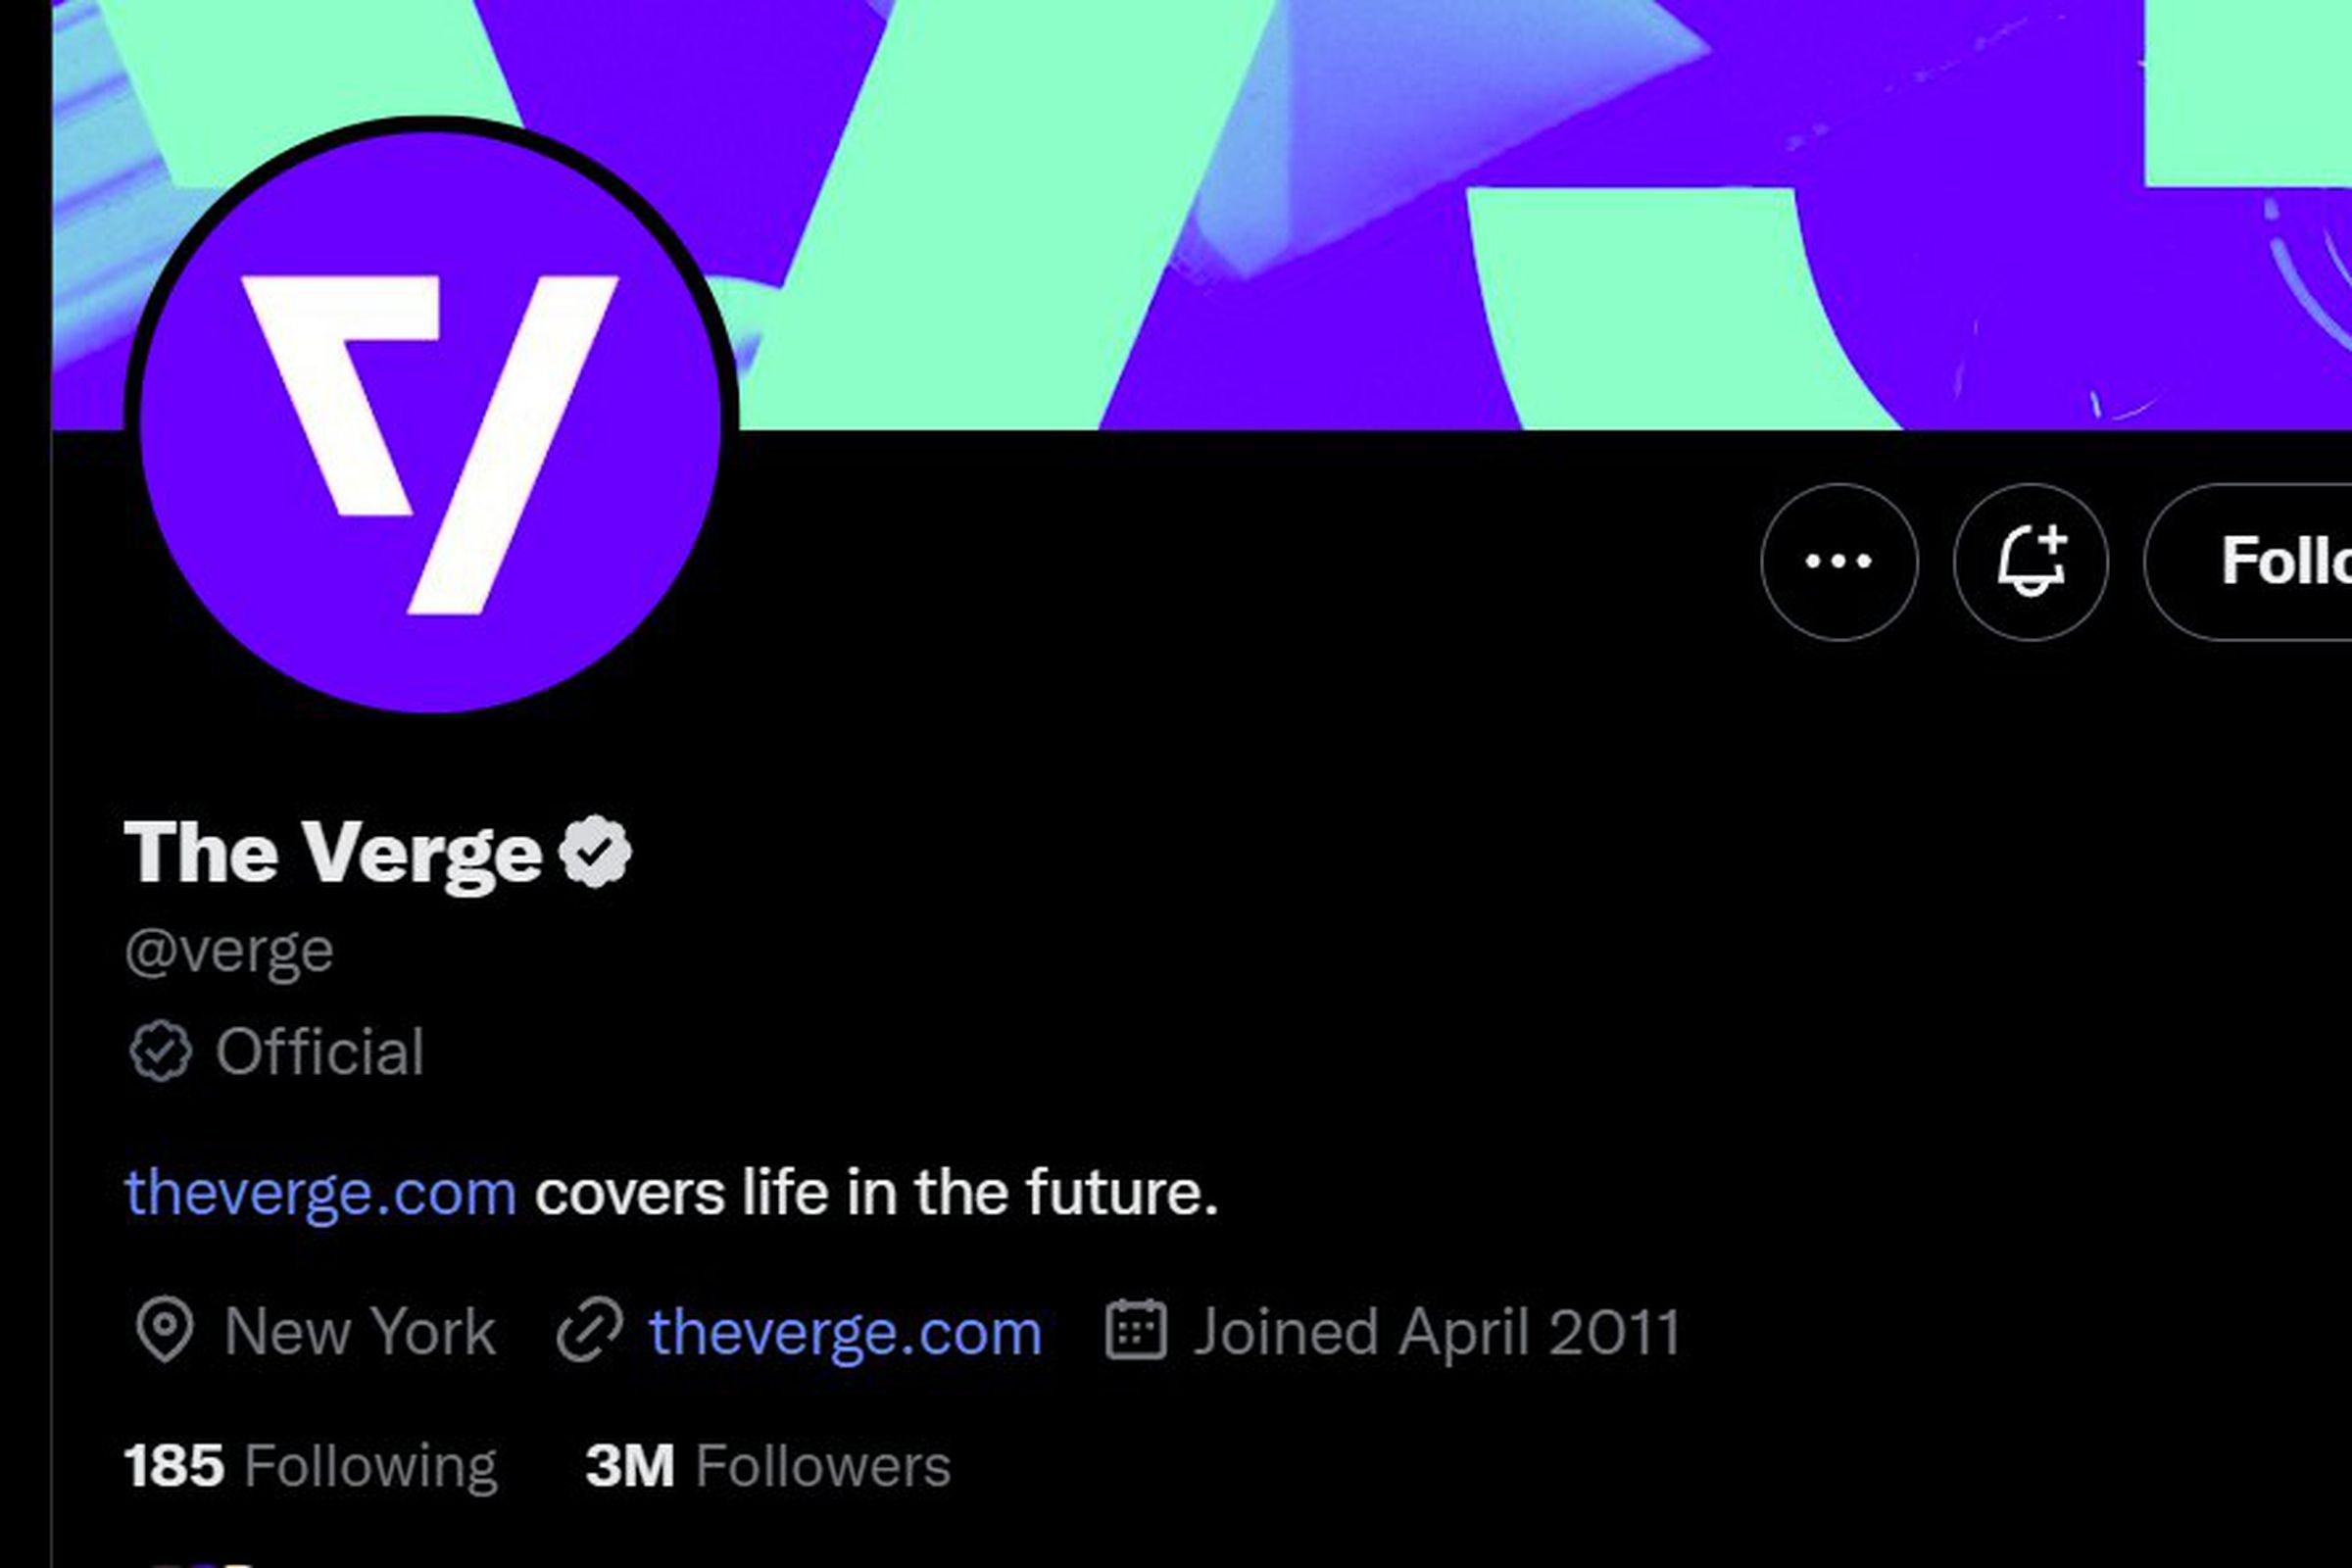 Twitter’s new gray “official” checkmark and label shown on the @Verge Twitter account.